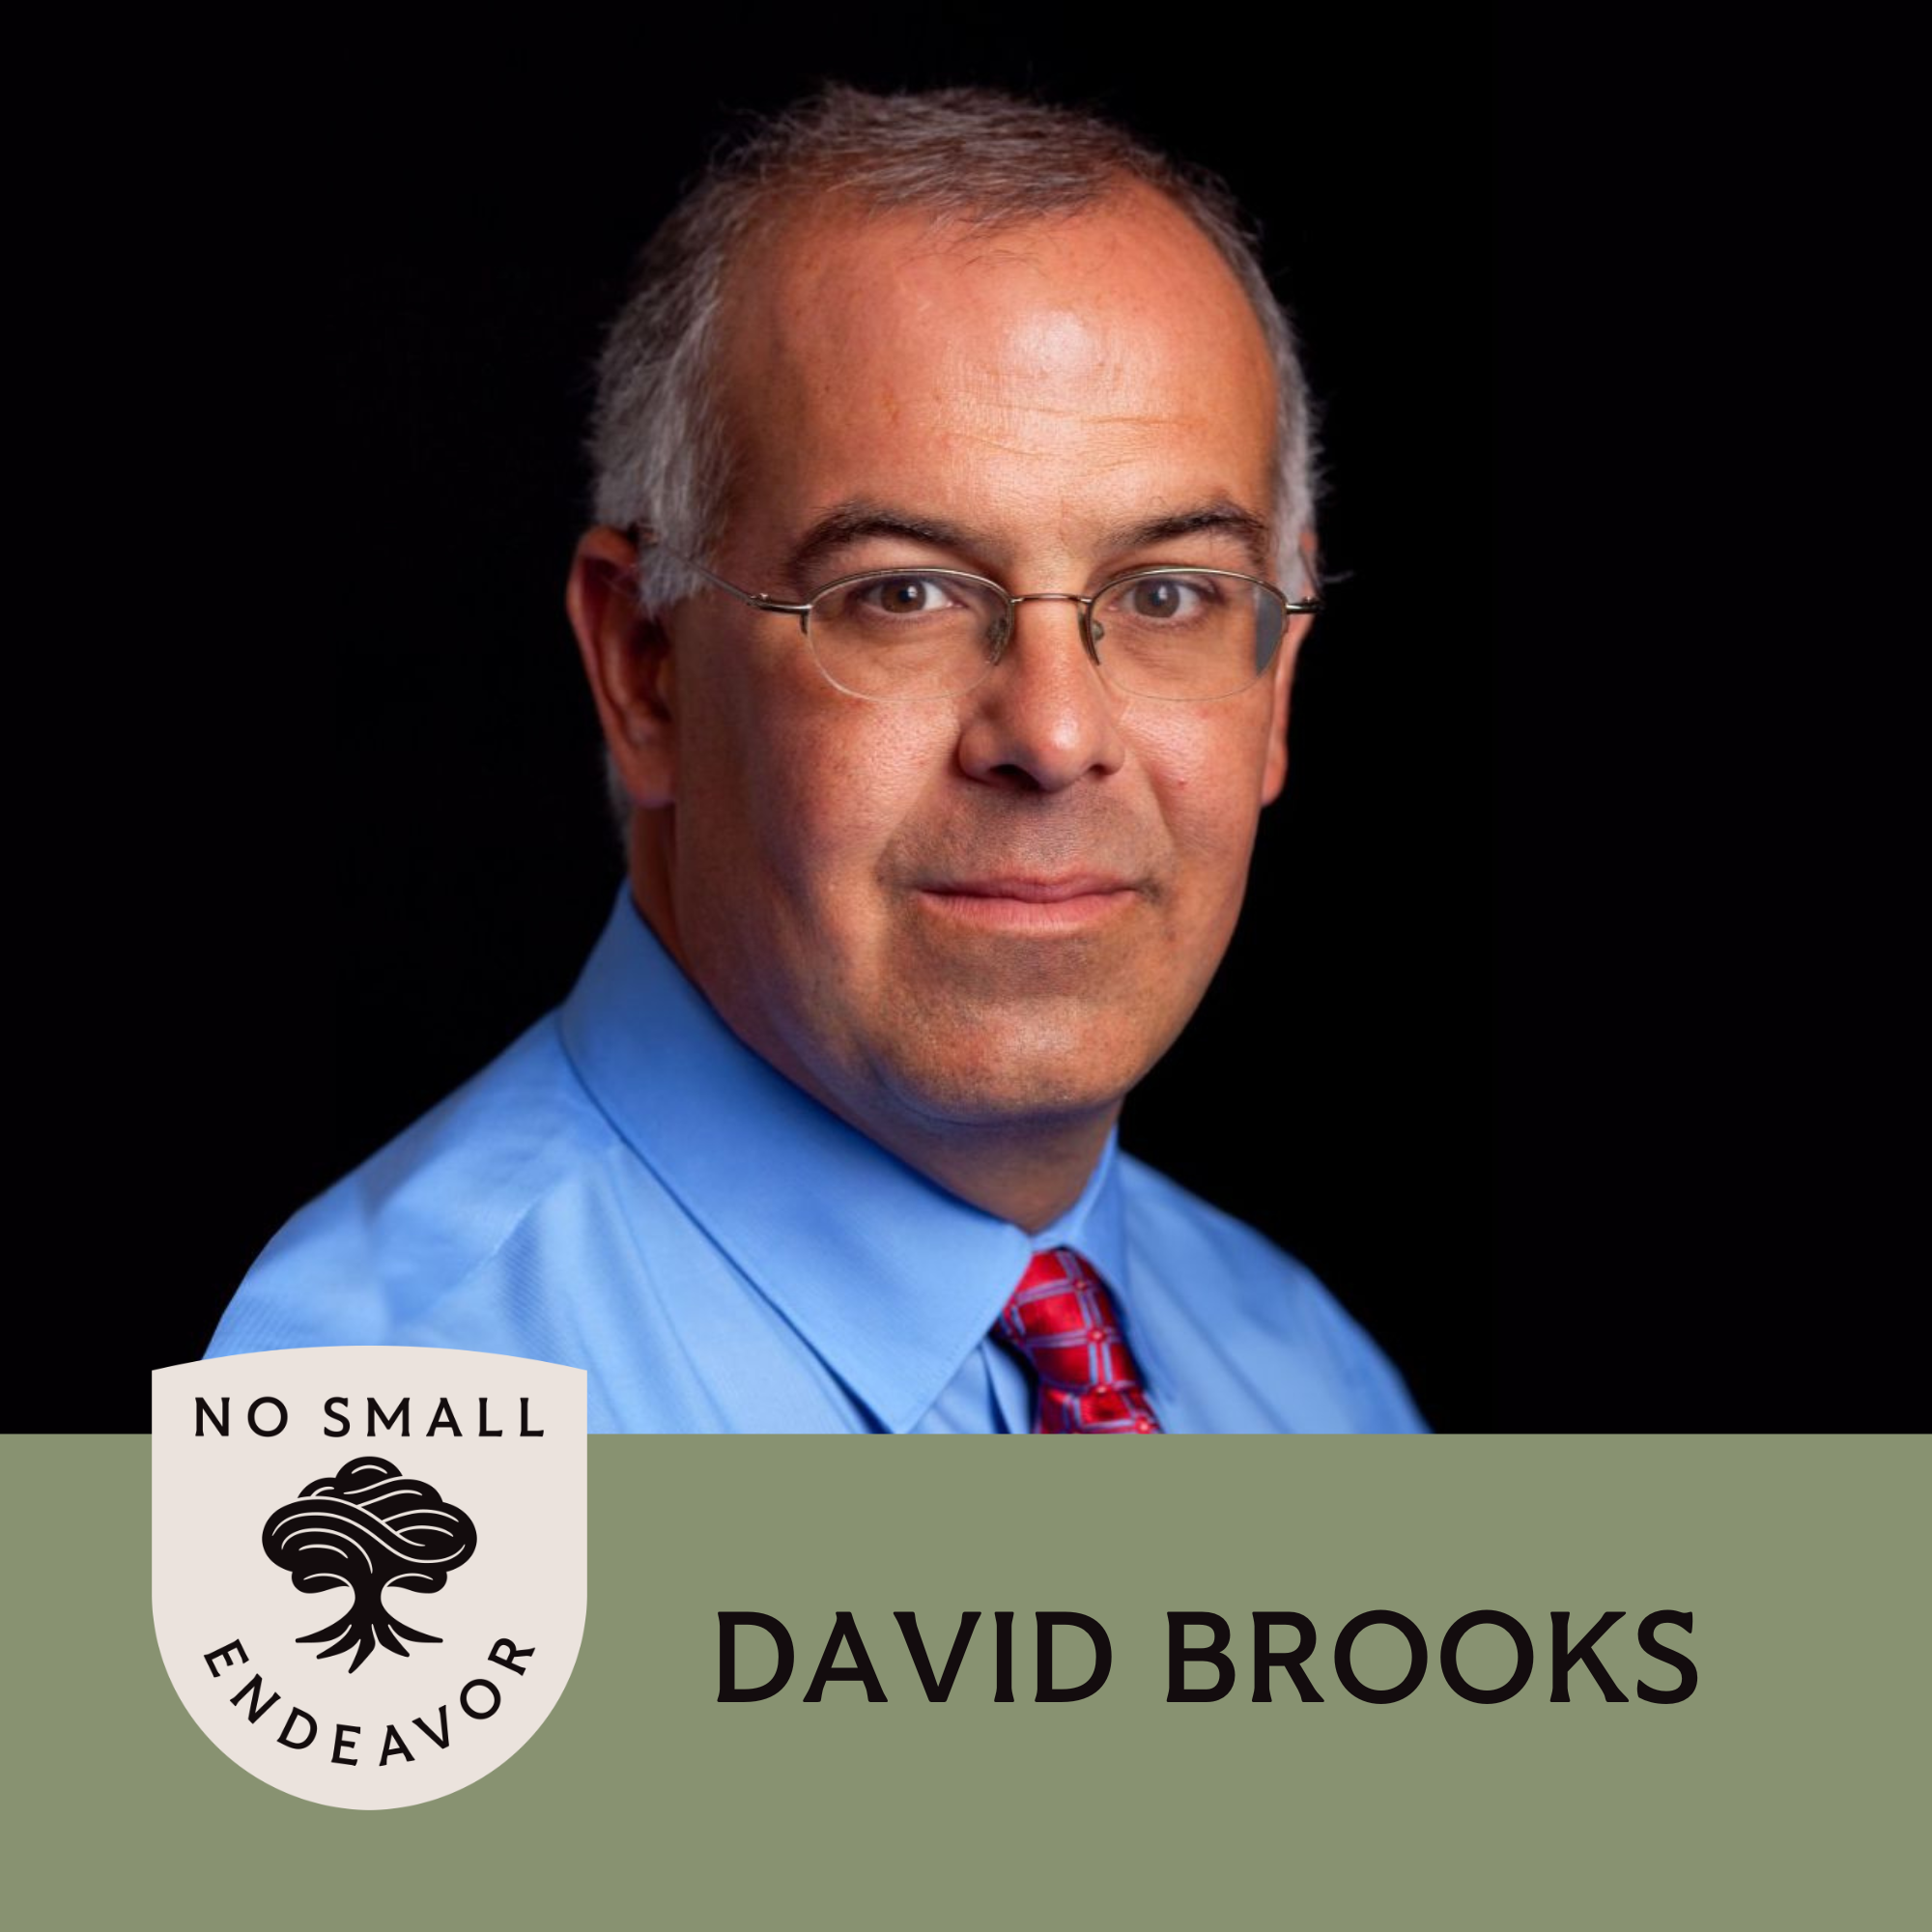 Thumbnail for "141: David Brooks: Can We Save Society By Knowing Each Other?".